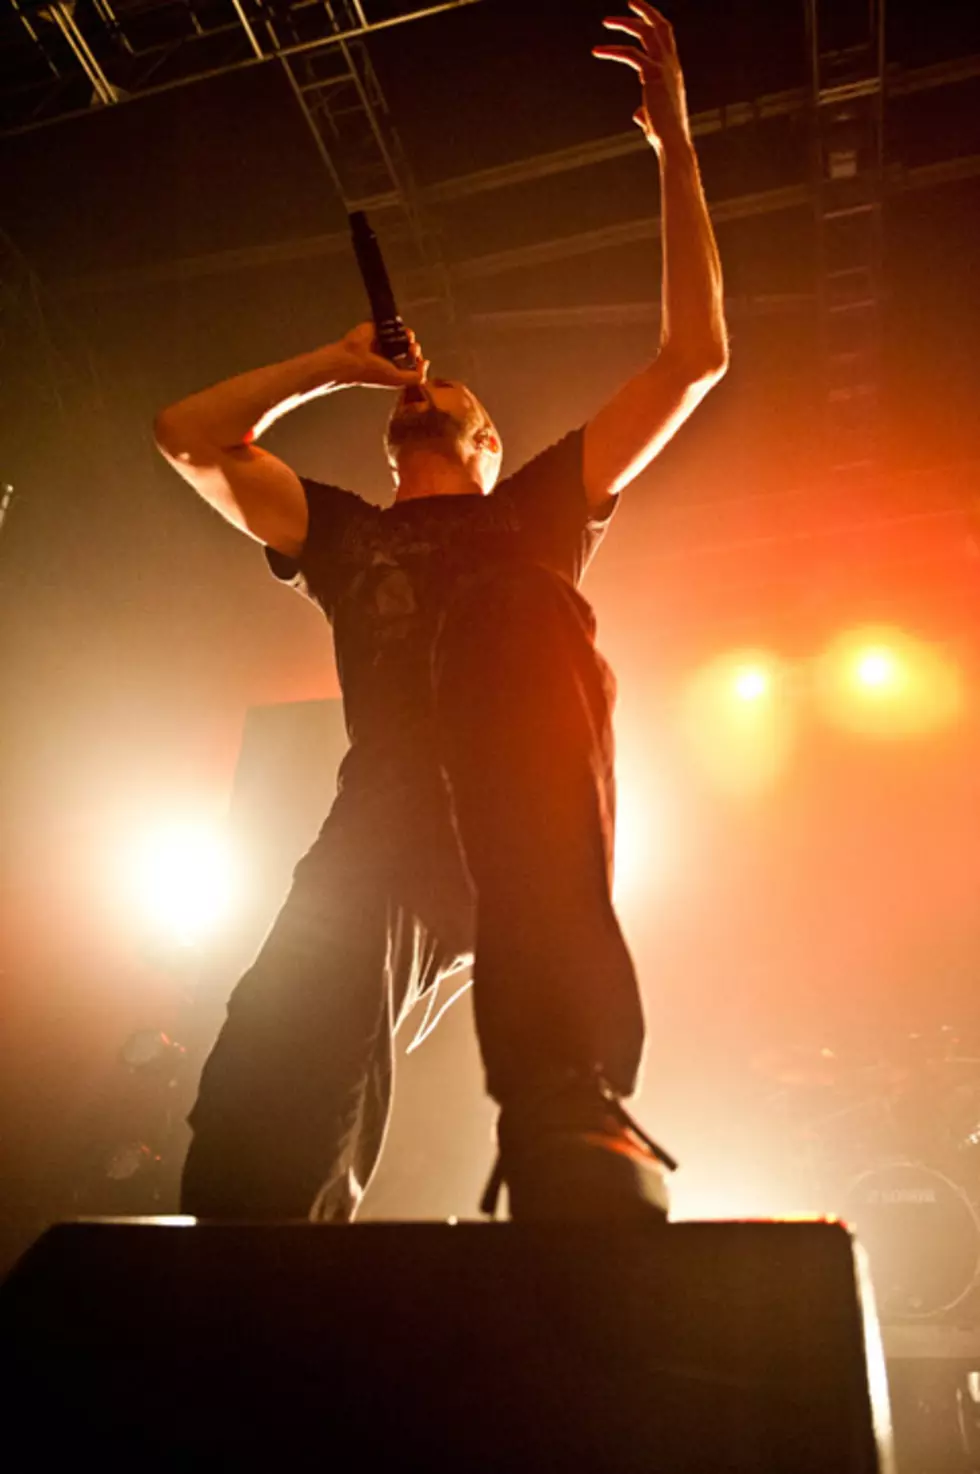 Meshuggah playing the Vic Theatre on 25th anniversary tour, polling fans to choose their setlists